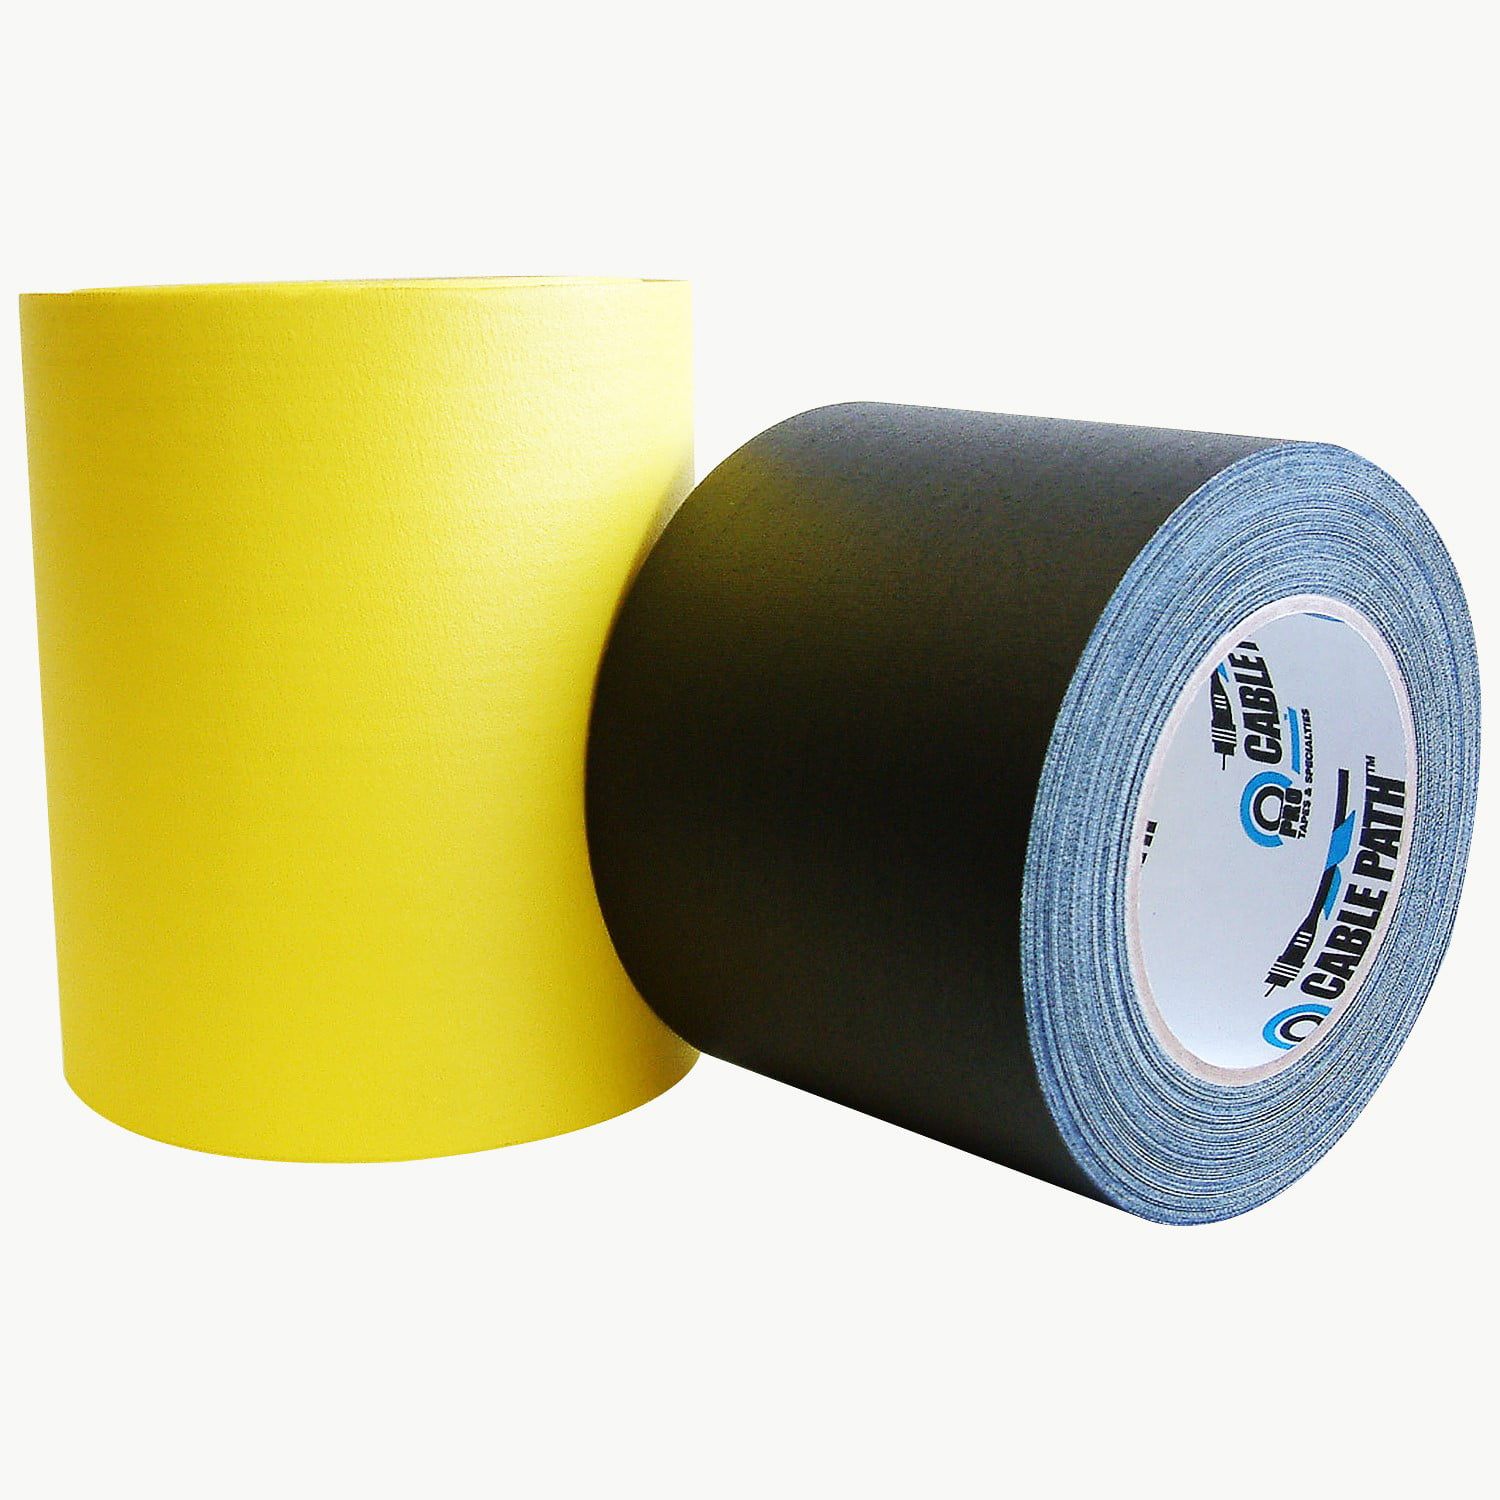 1 Roll 4" x 39 yd Cable Path Gaffers Tape Black & Yellow Free Shipping 